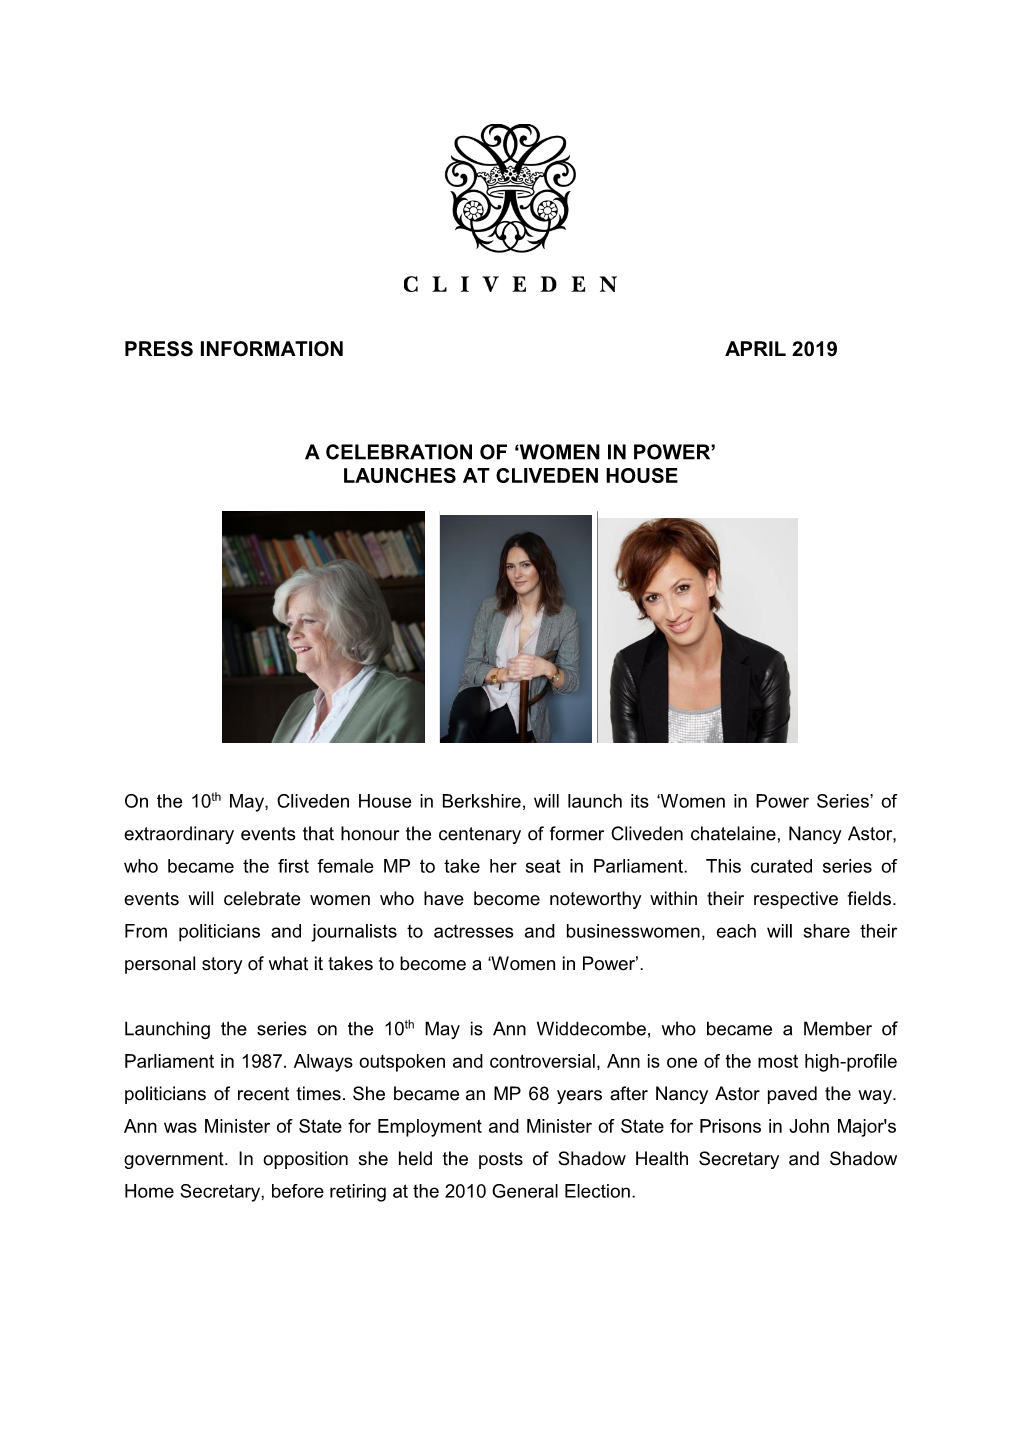 Press Information April 2019 a Celebration of 'Women in Power' Launches at Cliveden House